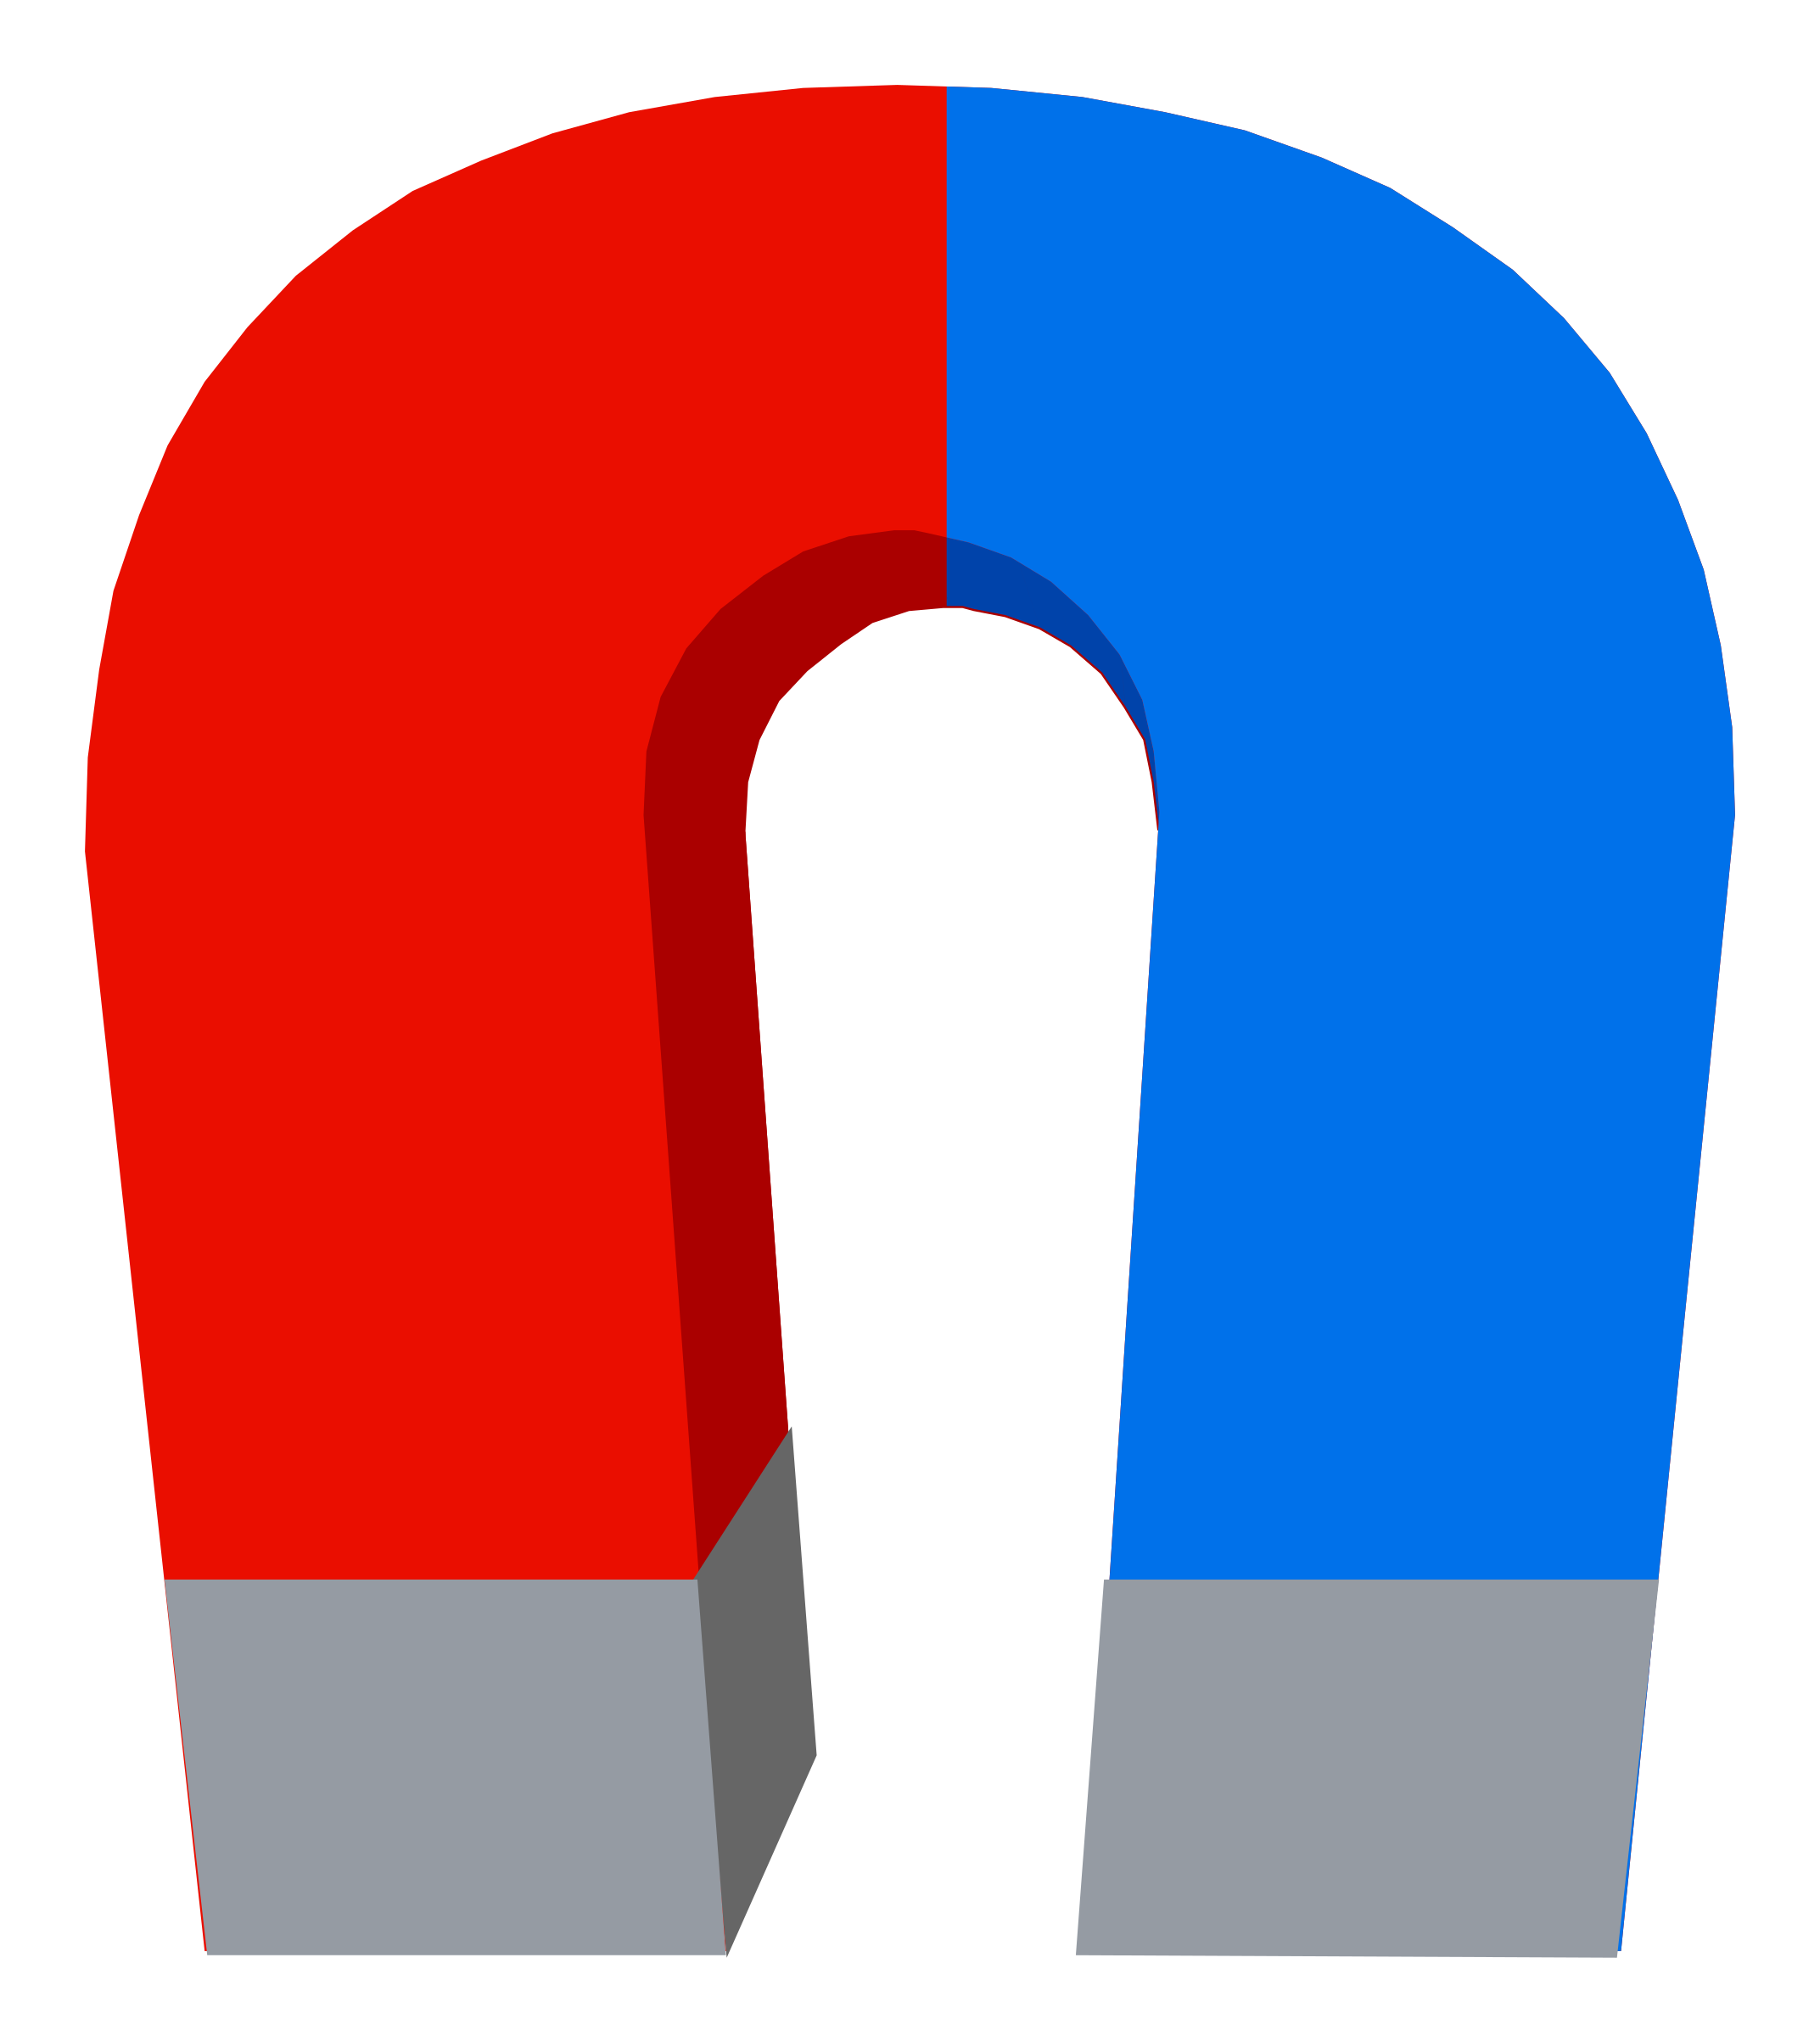 Red and blue magnet